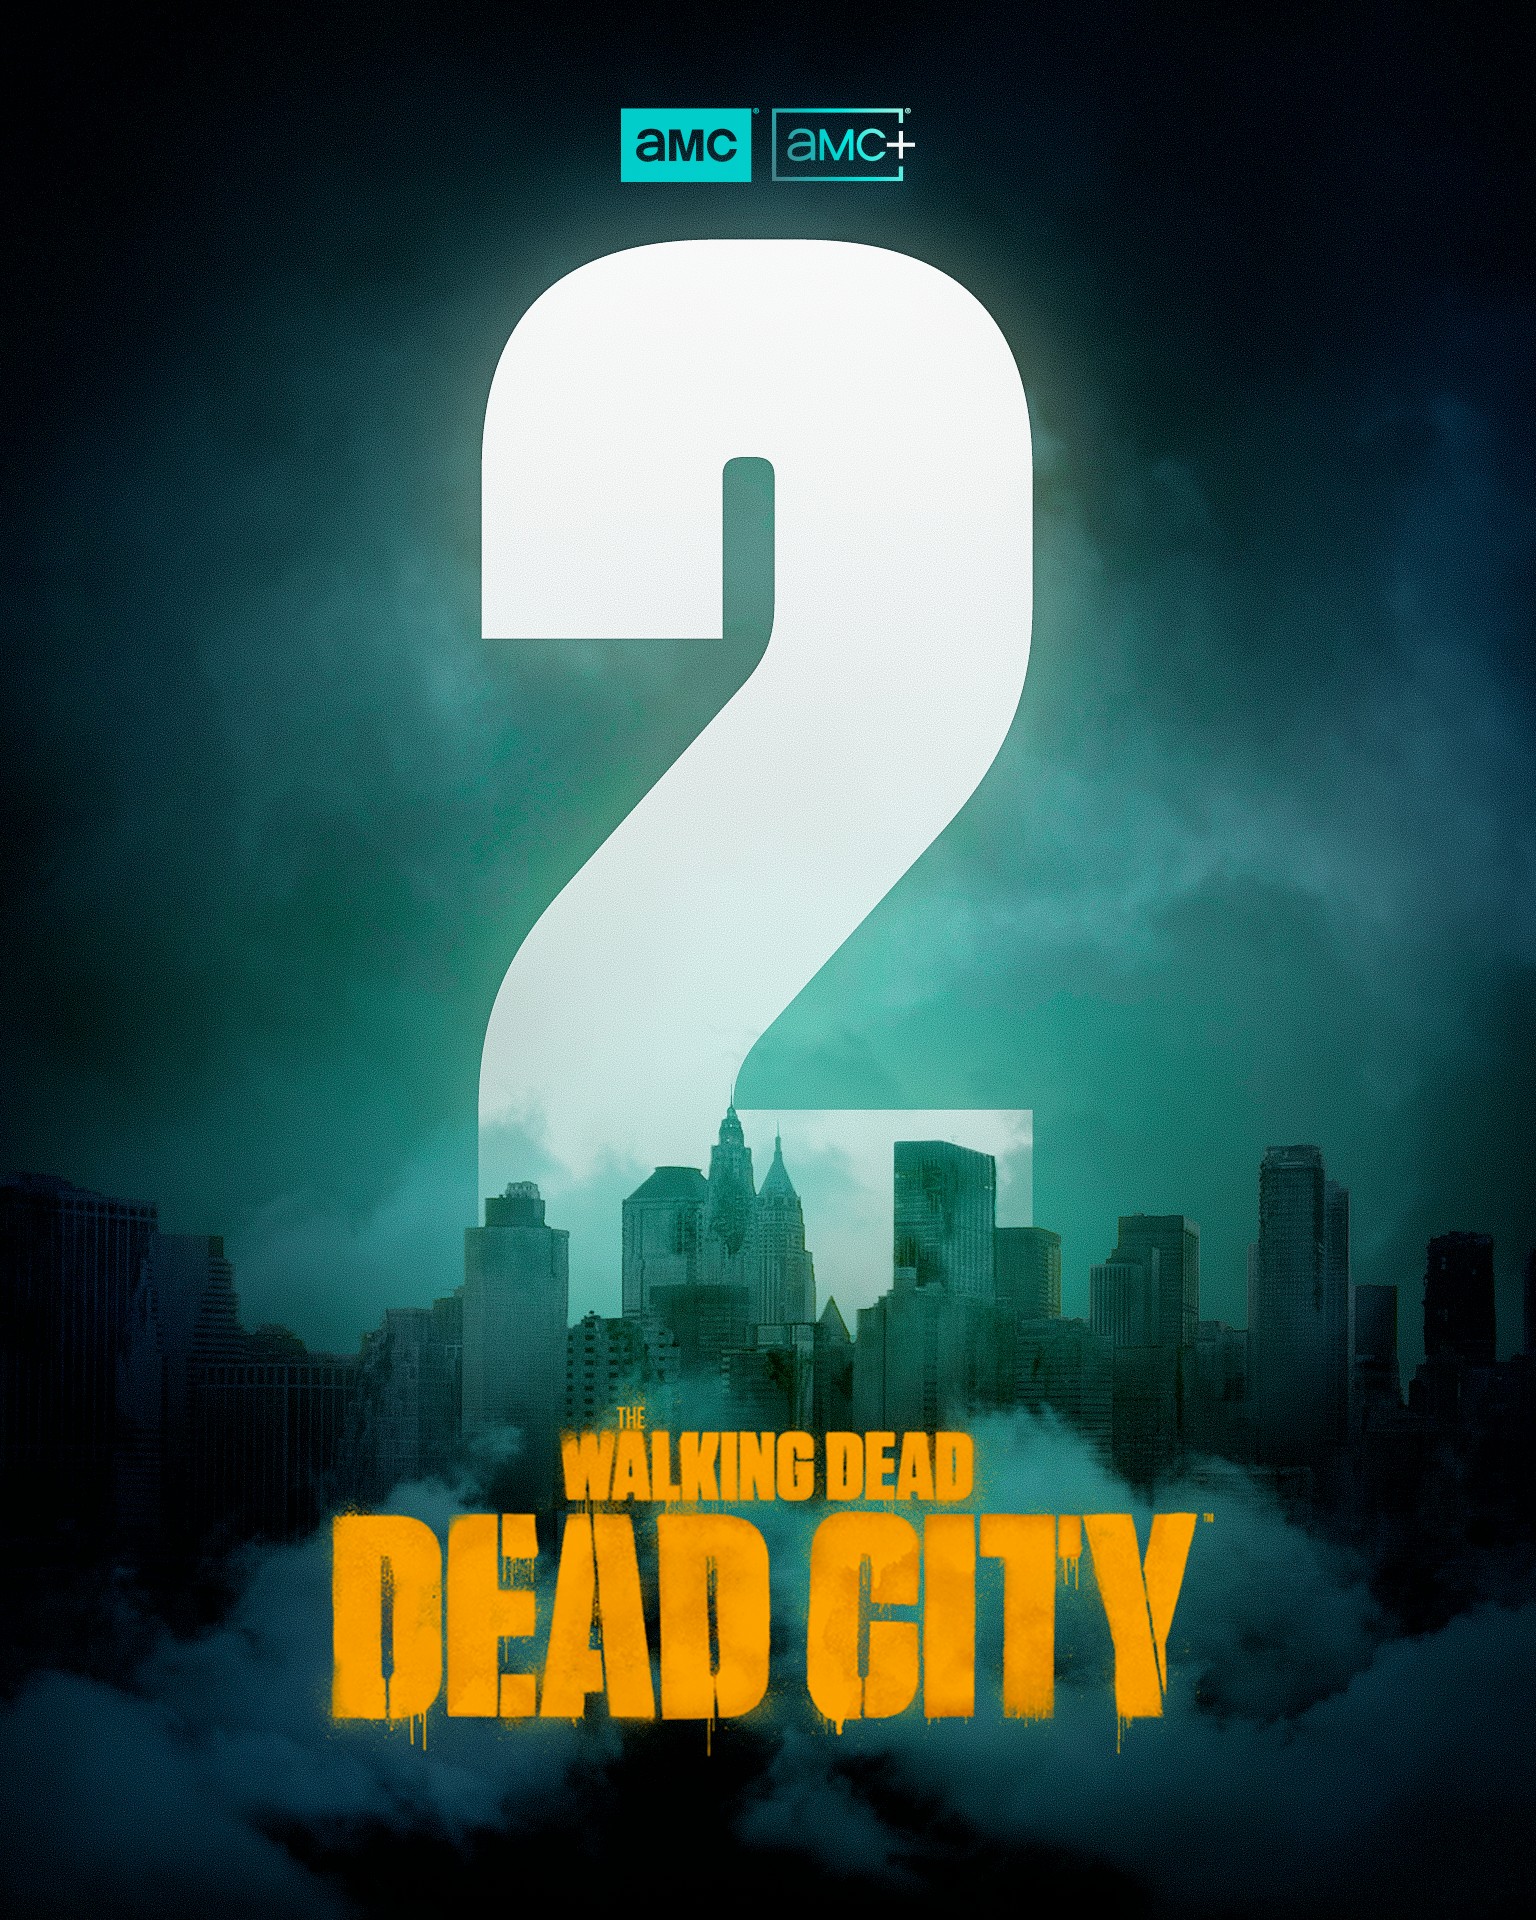 Is The Walking Dead: Dead City a limited series?